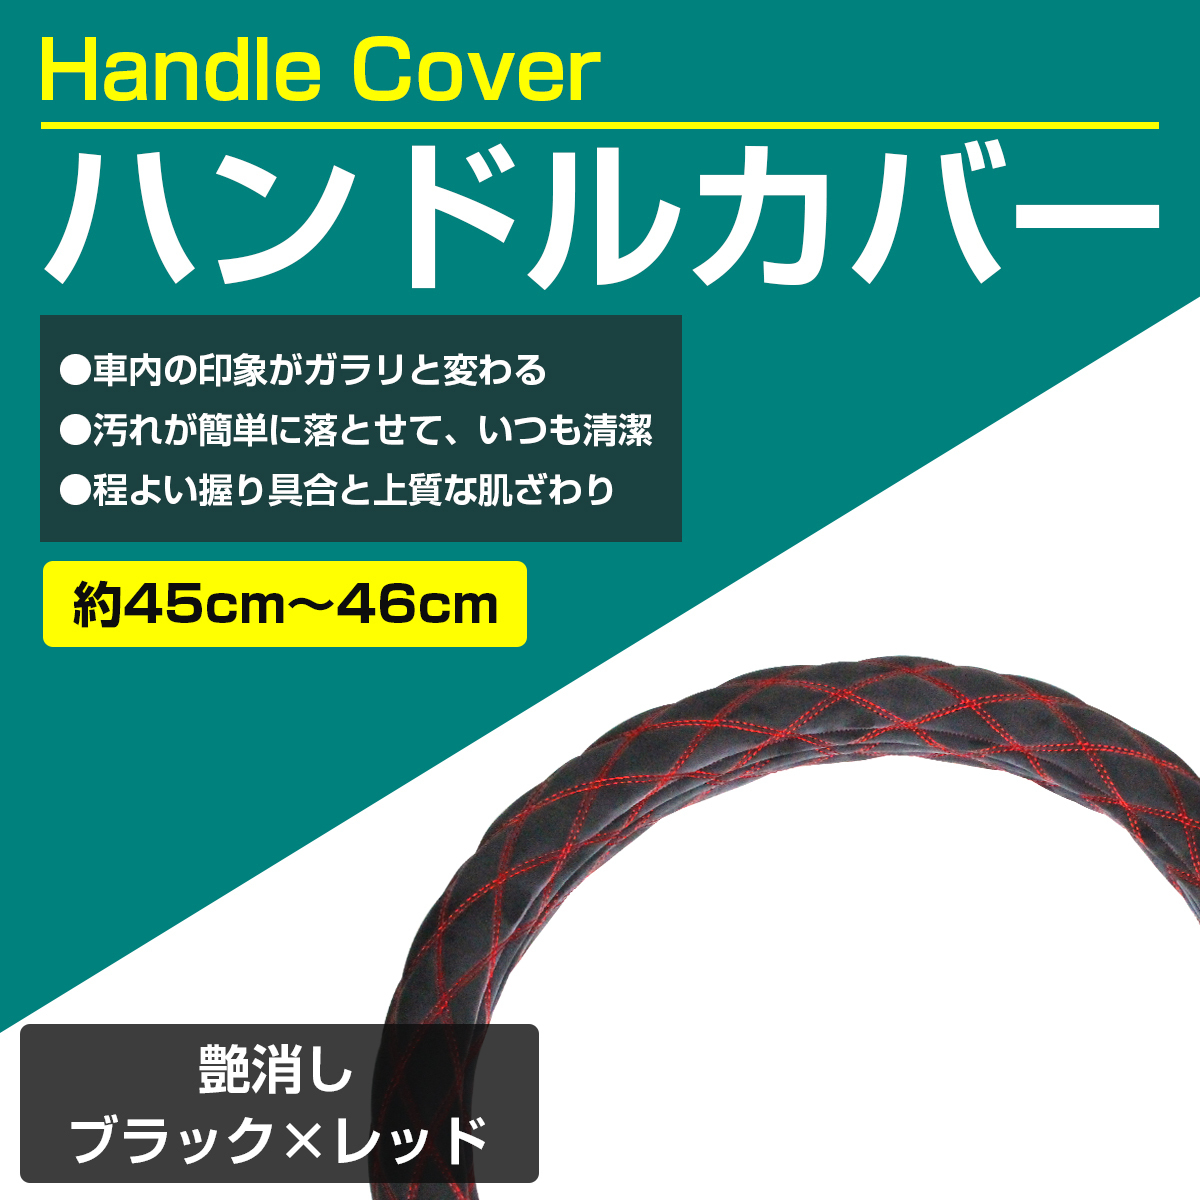 n back style s.-do double stitch diamond cut steering wheel cover black × red thread L size Fuso large Blue TEC s super grade 